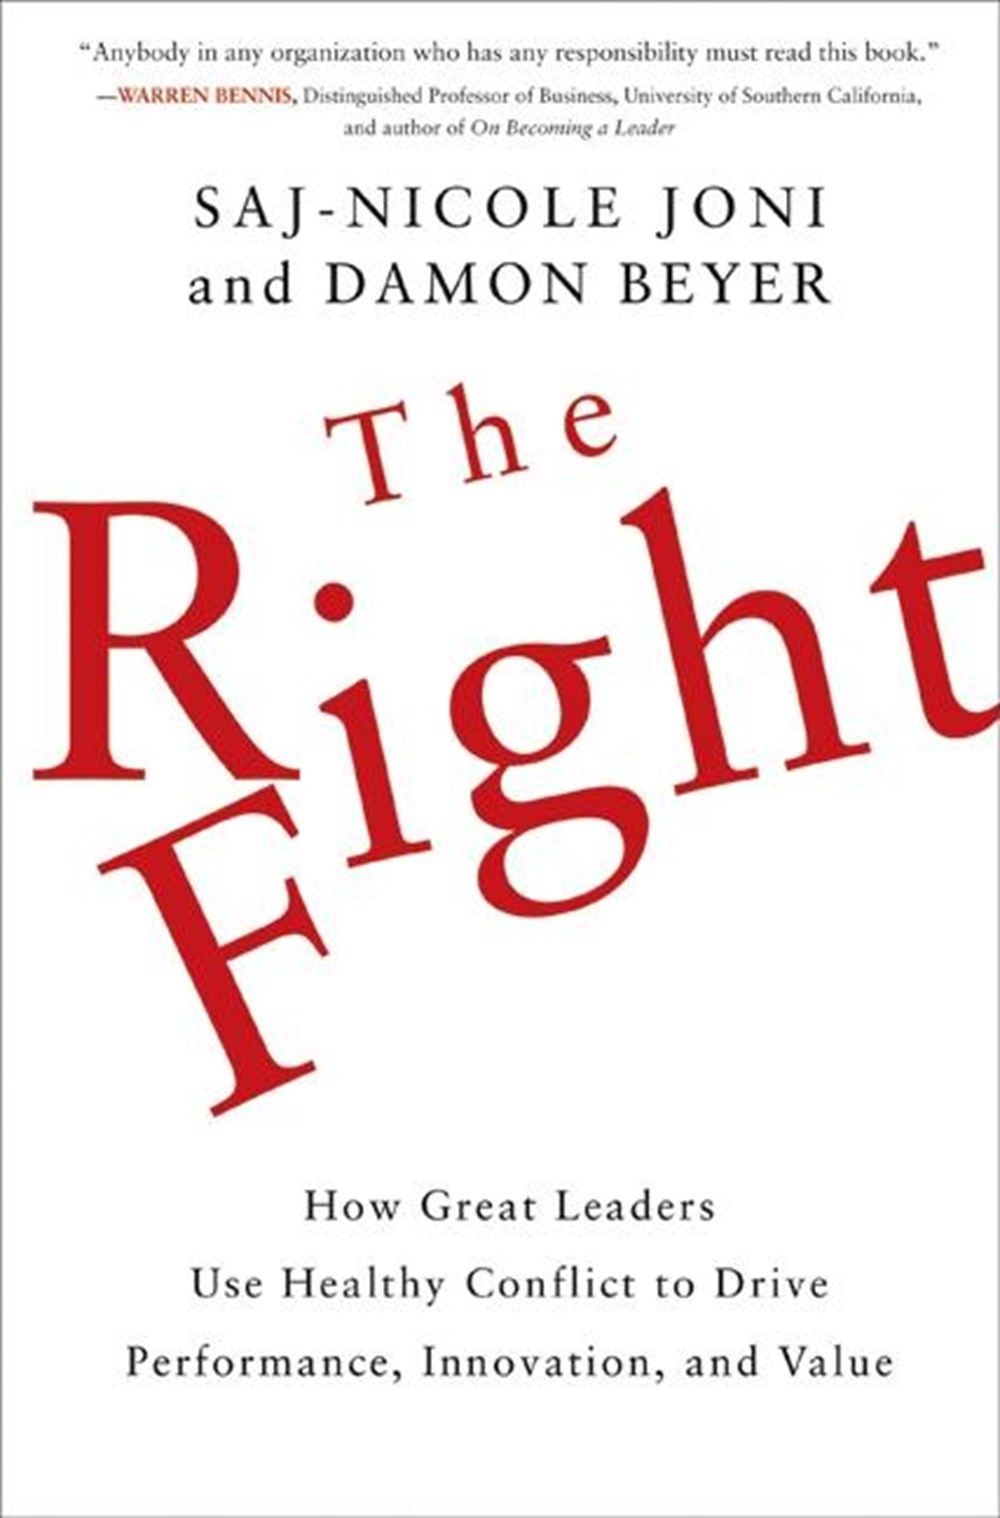 Right Fight How Great Leaders Use Healthy Conflict to Drive Performance, Innovation, and Value